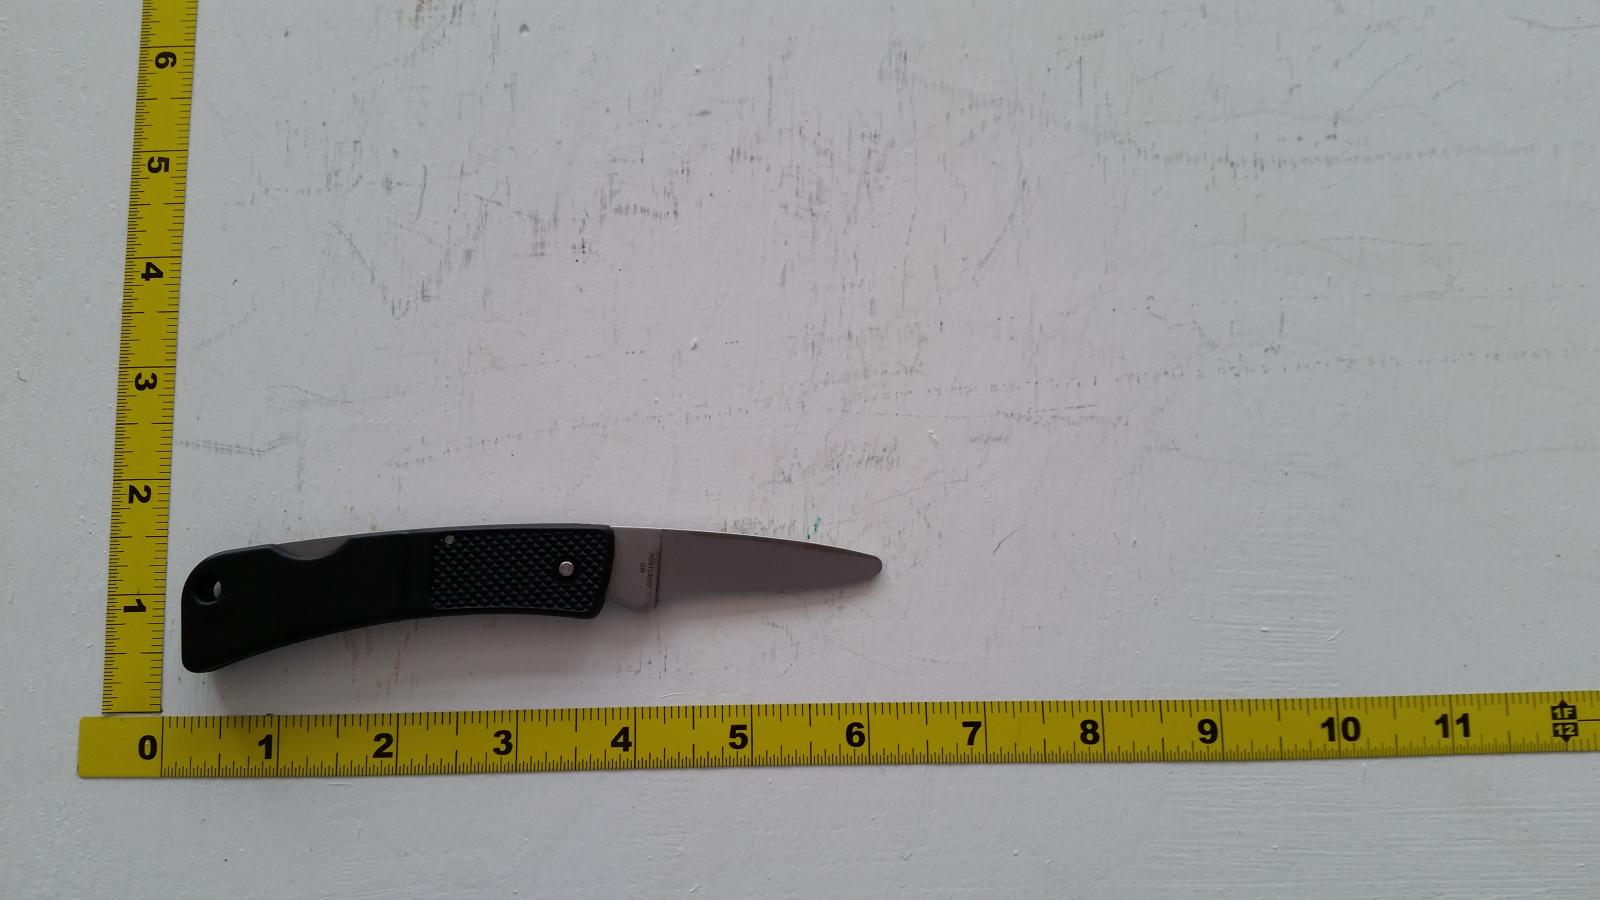 Very Small Gerber Pocketknife - NOT approved for blade-to-blade stage combat.